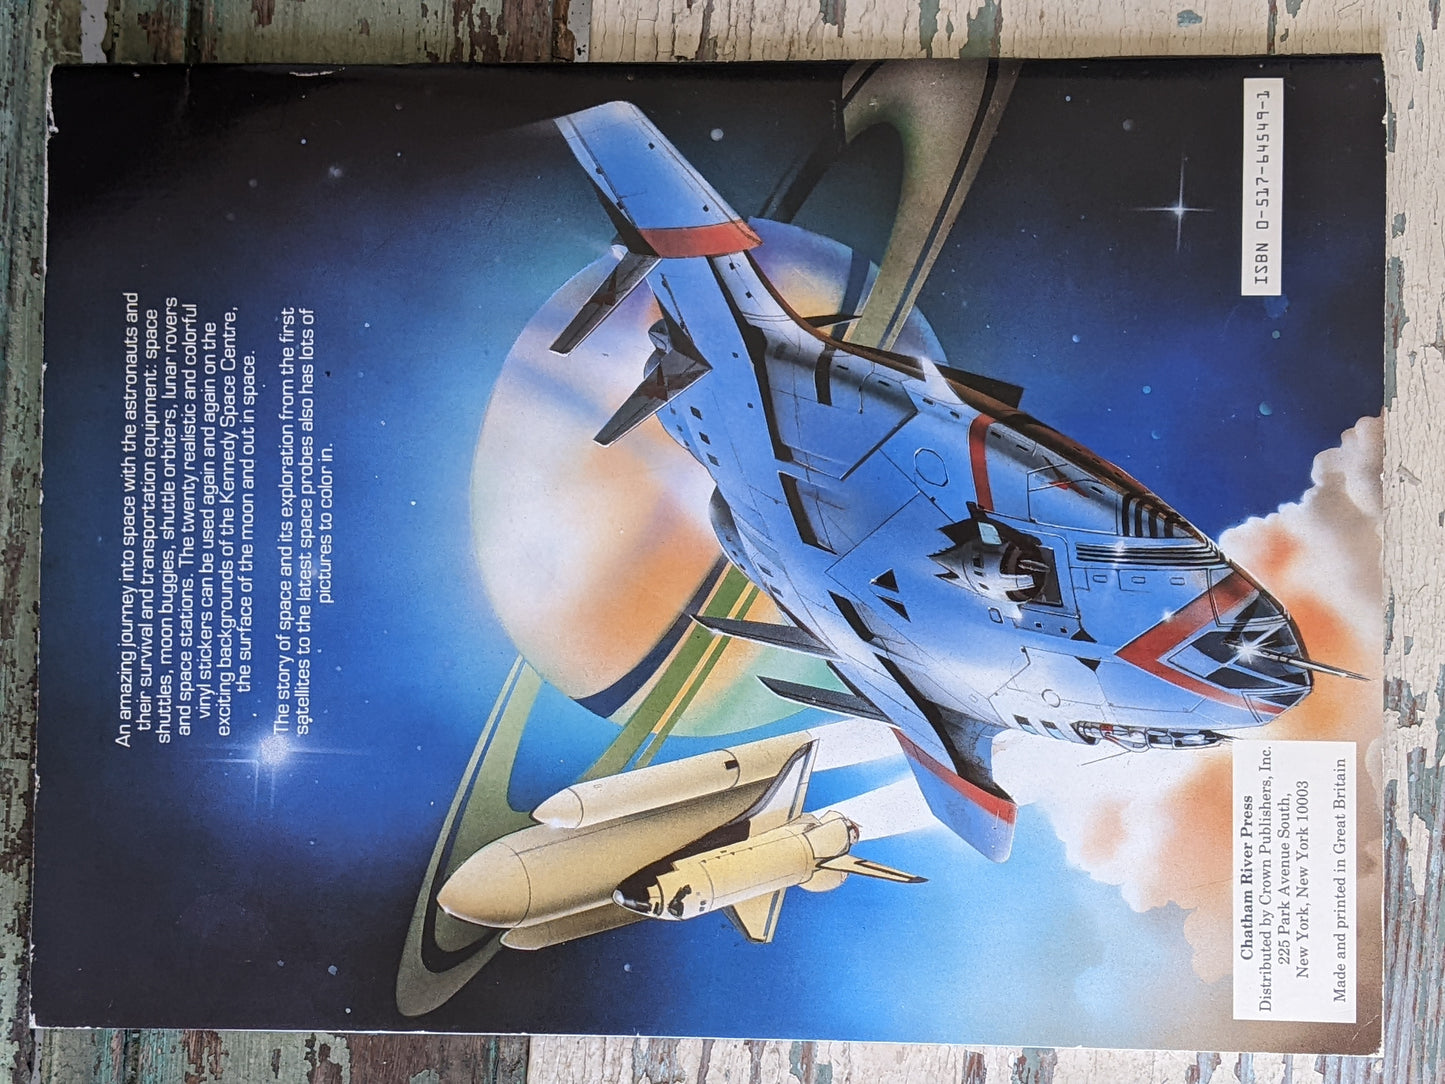 1988 Space Sticker Book !! Unused Peel and Play !! Amazing Nostalgia Vintage Gifts & Collectibles